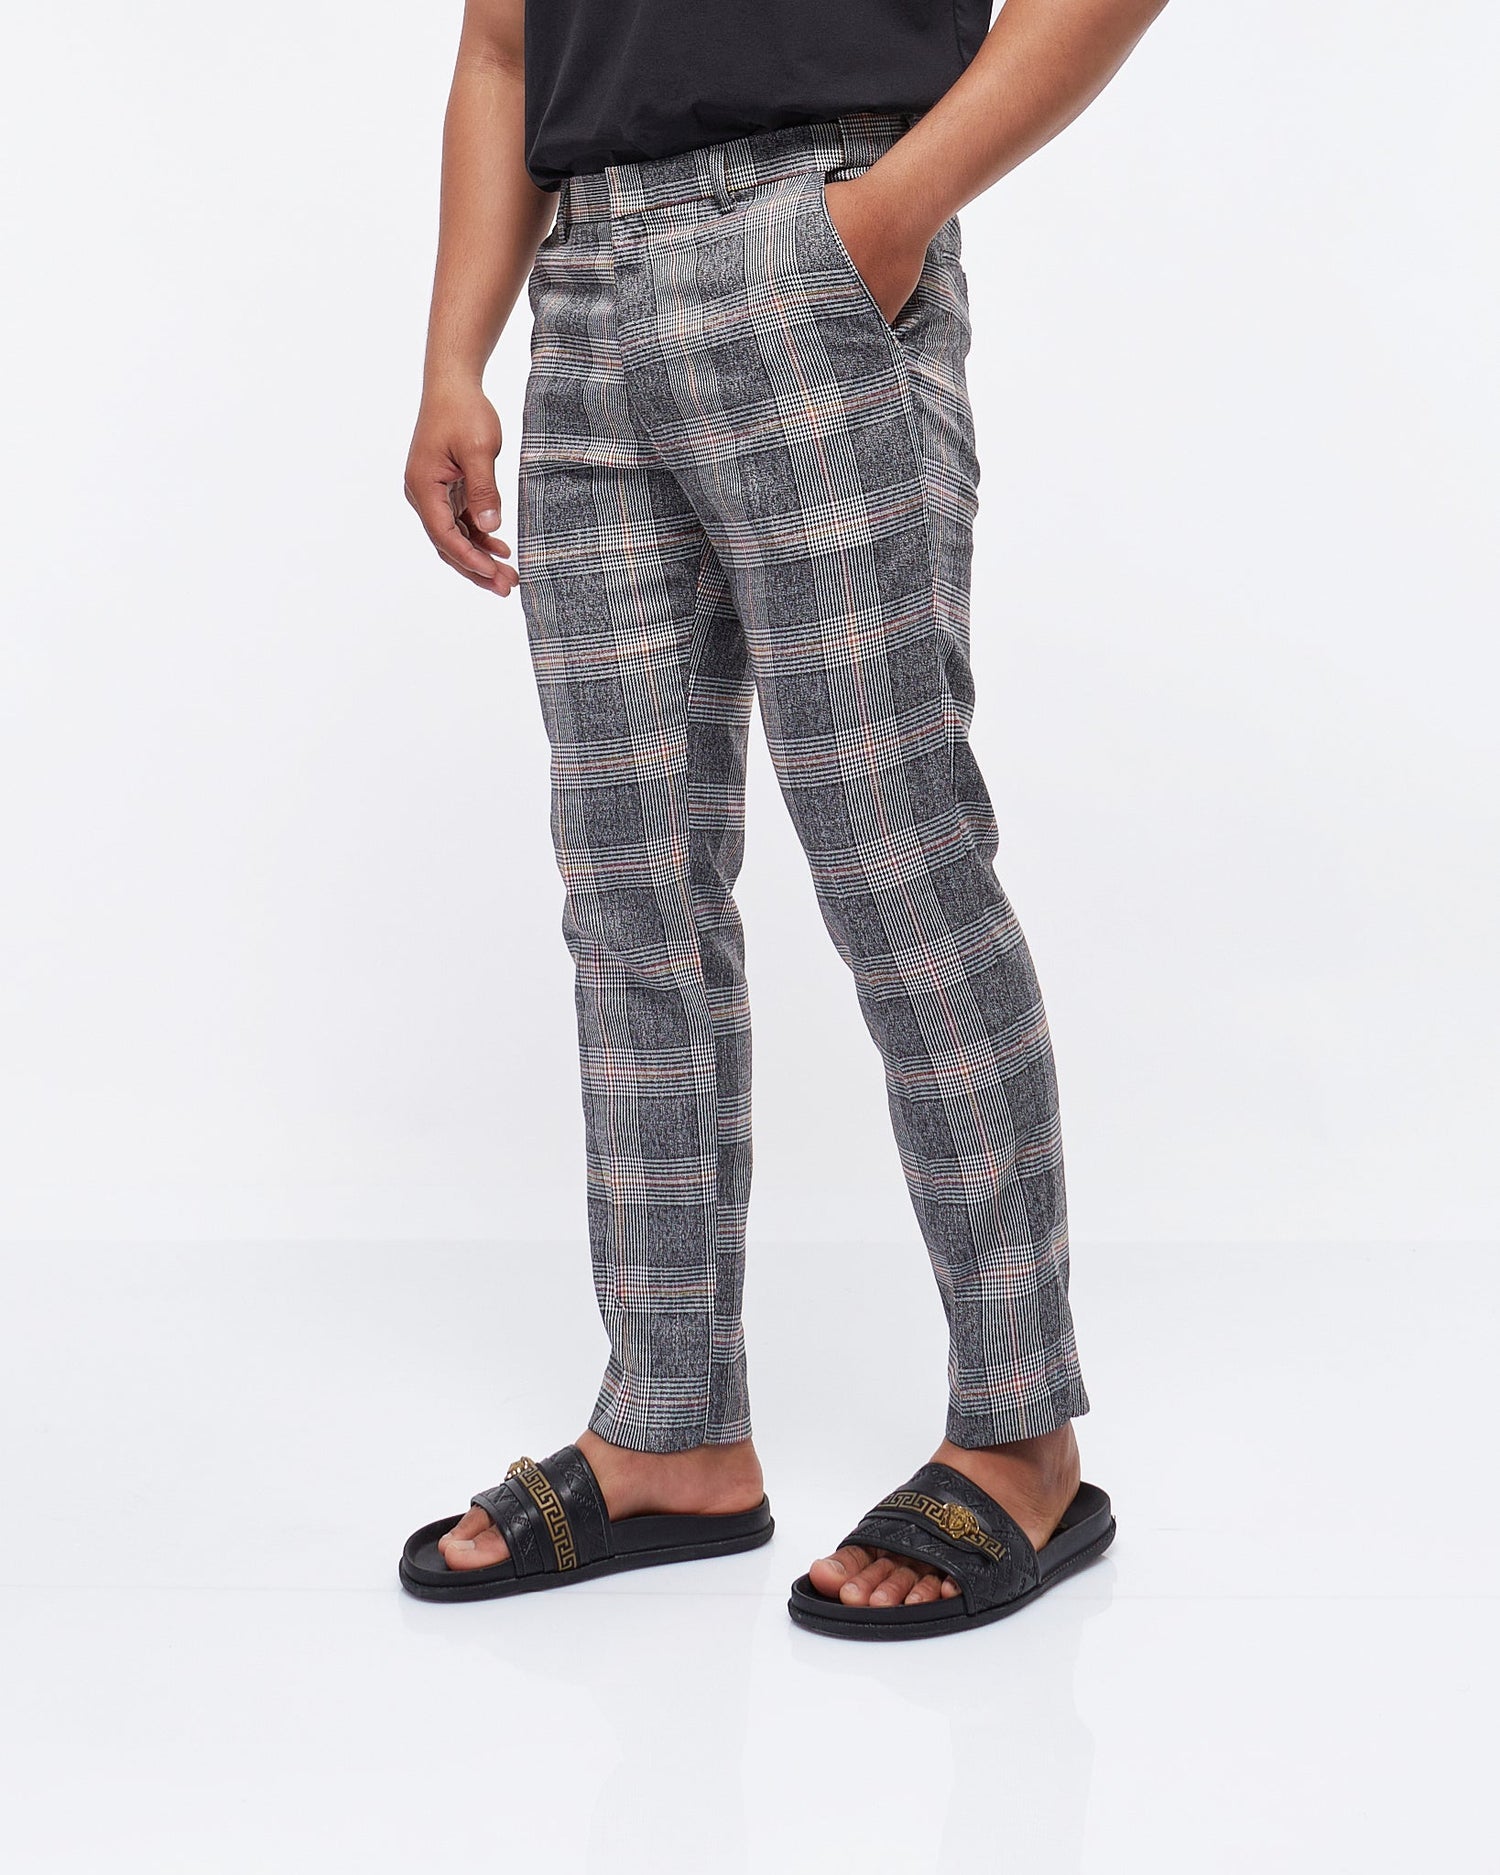 MOI OUTFIT-Checked Casual Men Slim Fit Pants 25.90